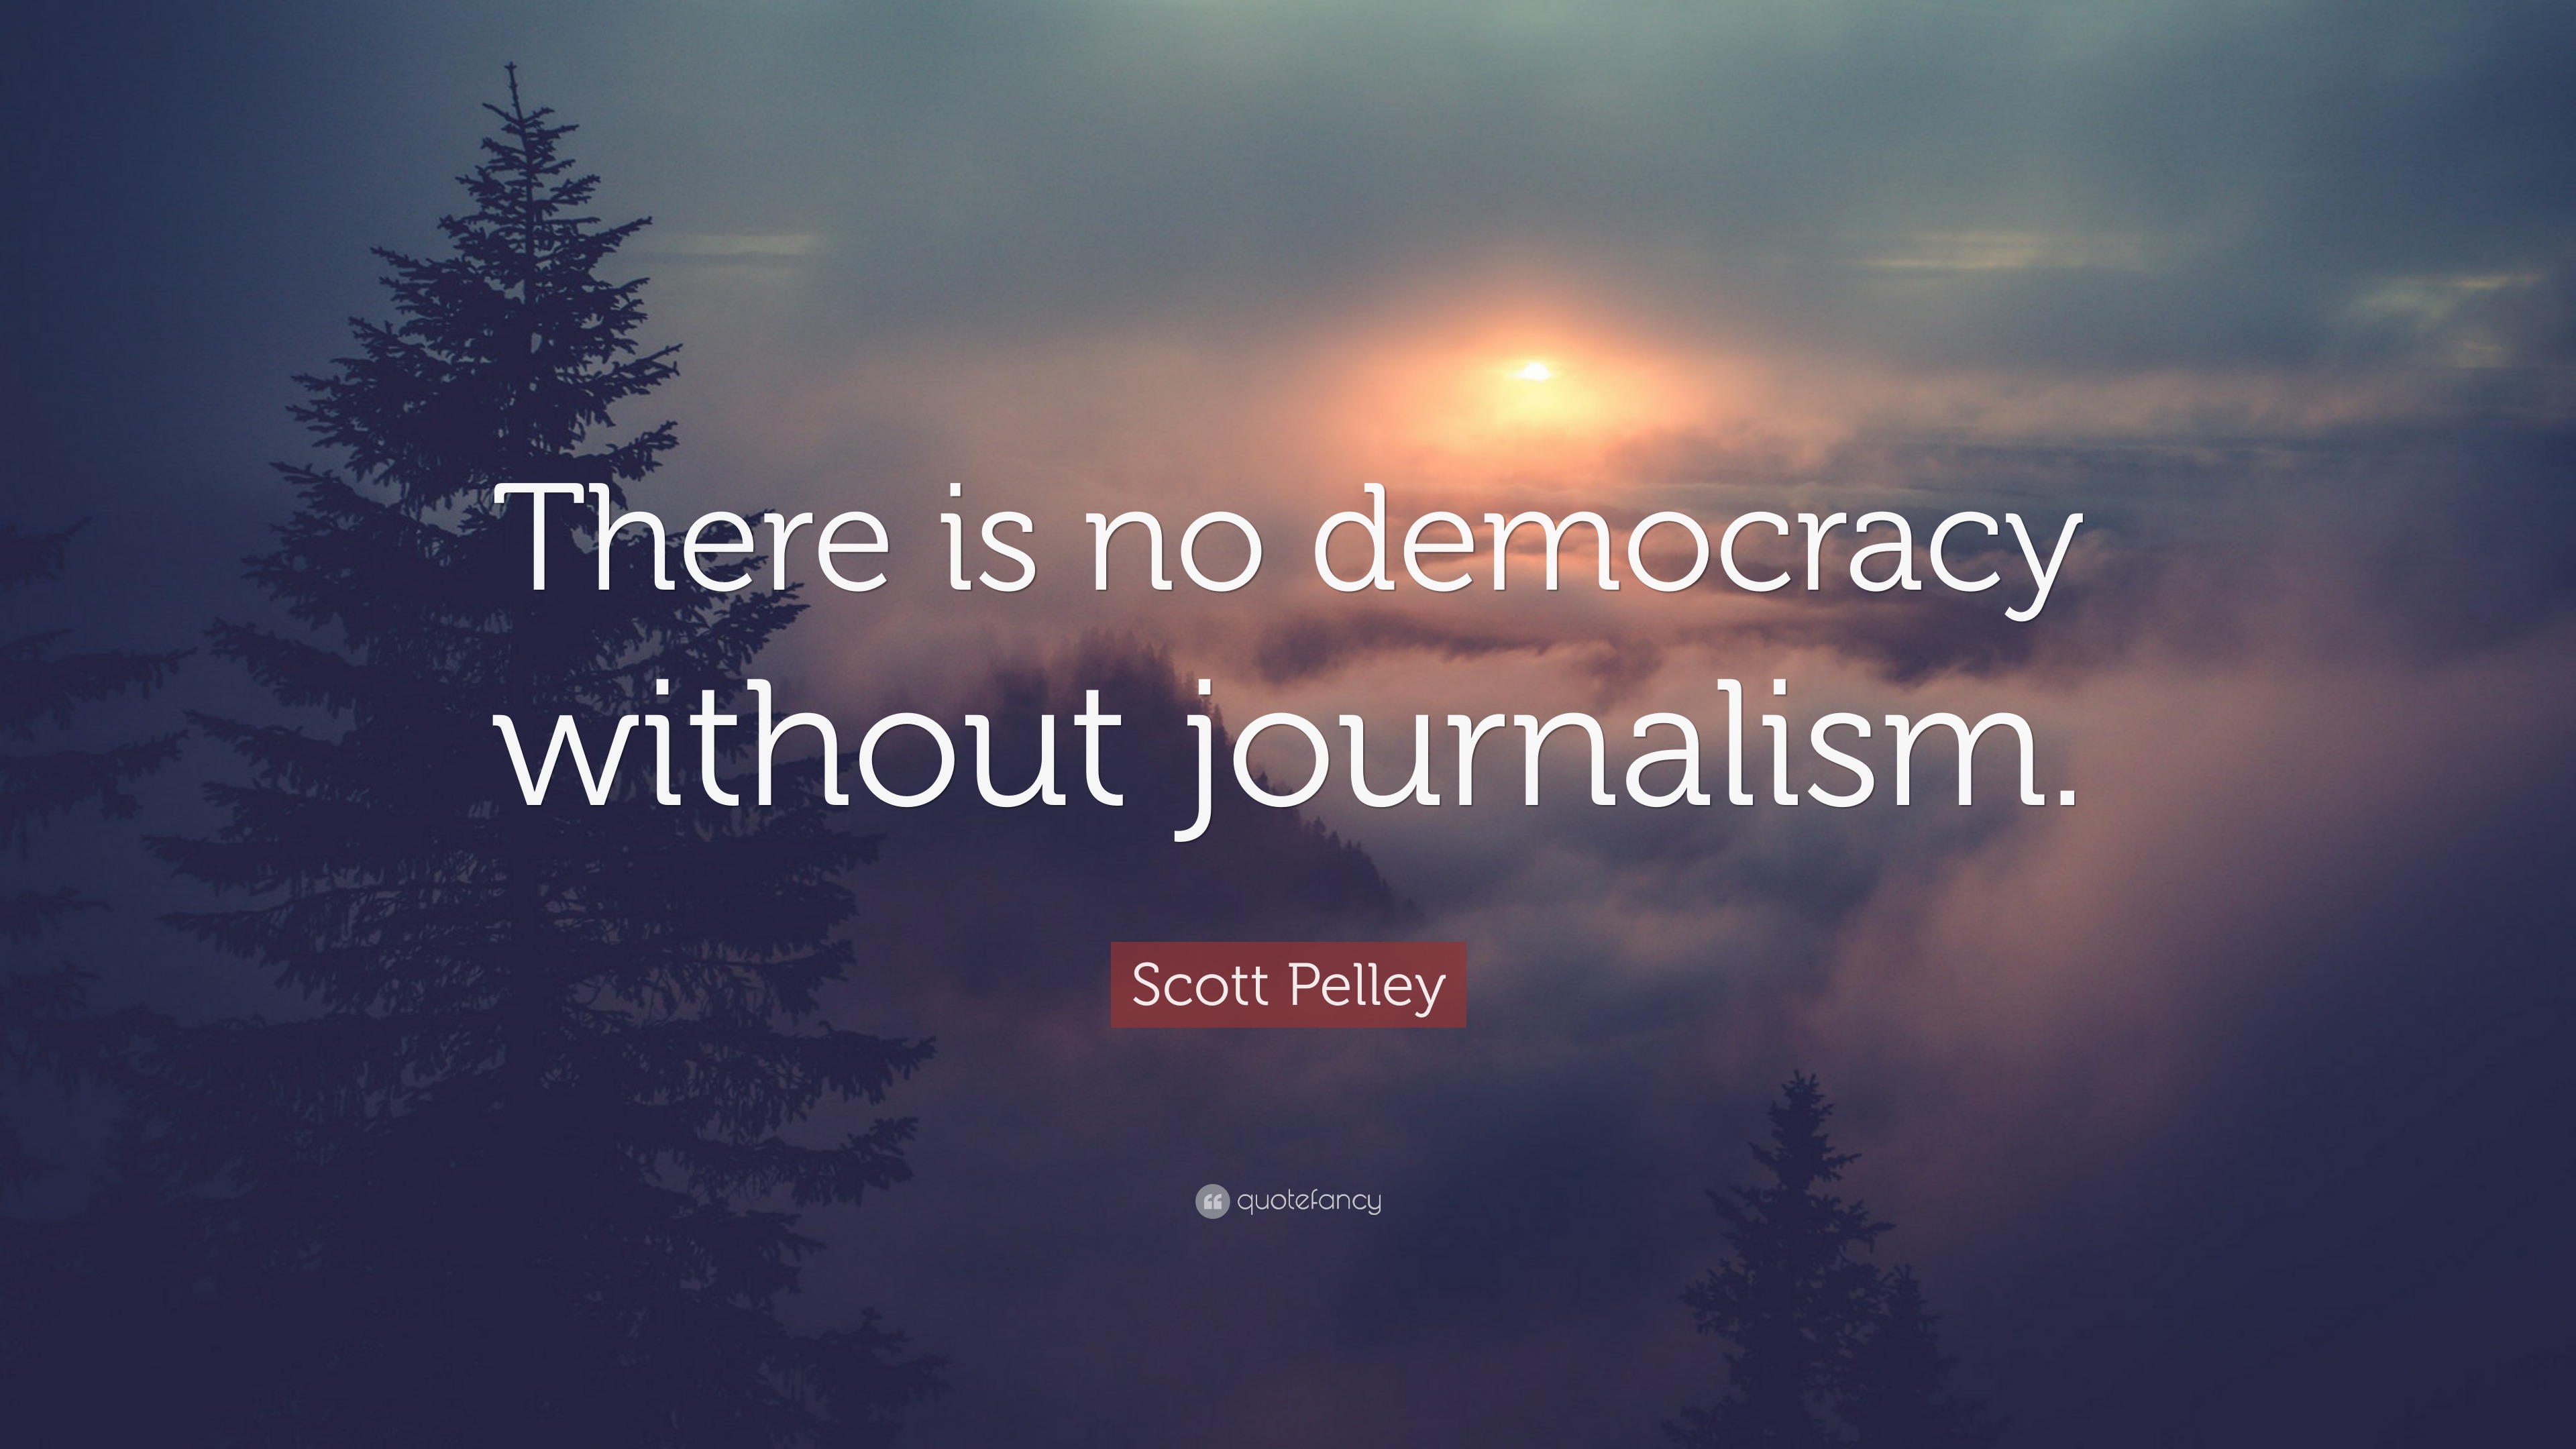 victor pickard democracy without journalism